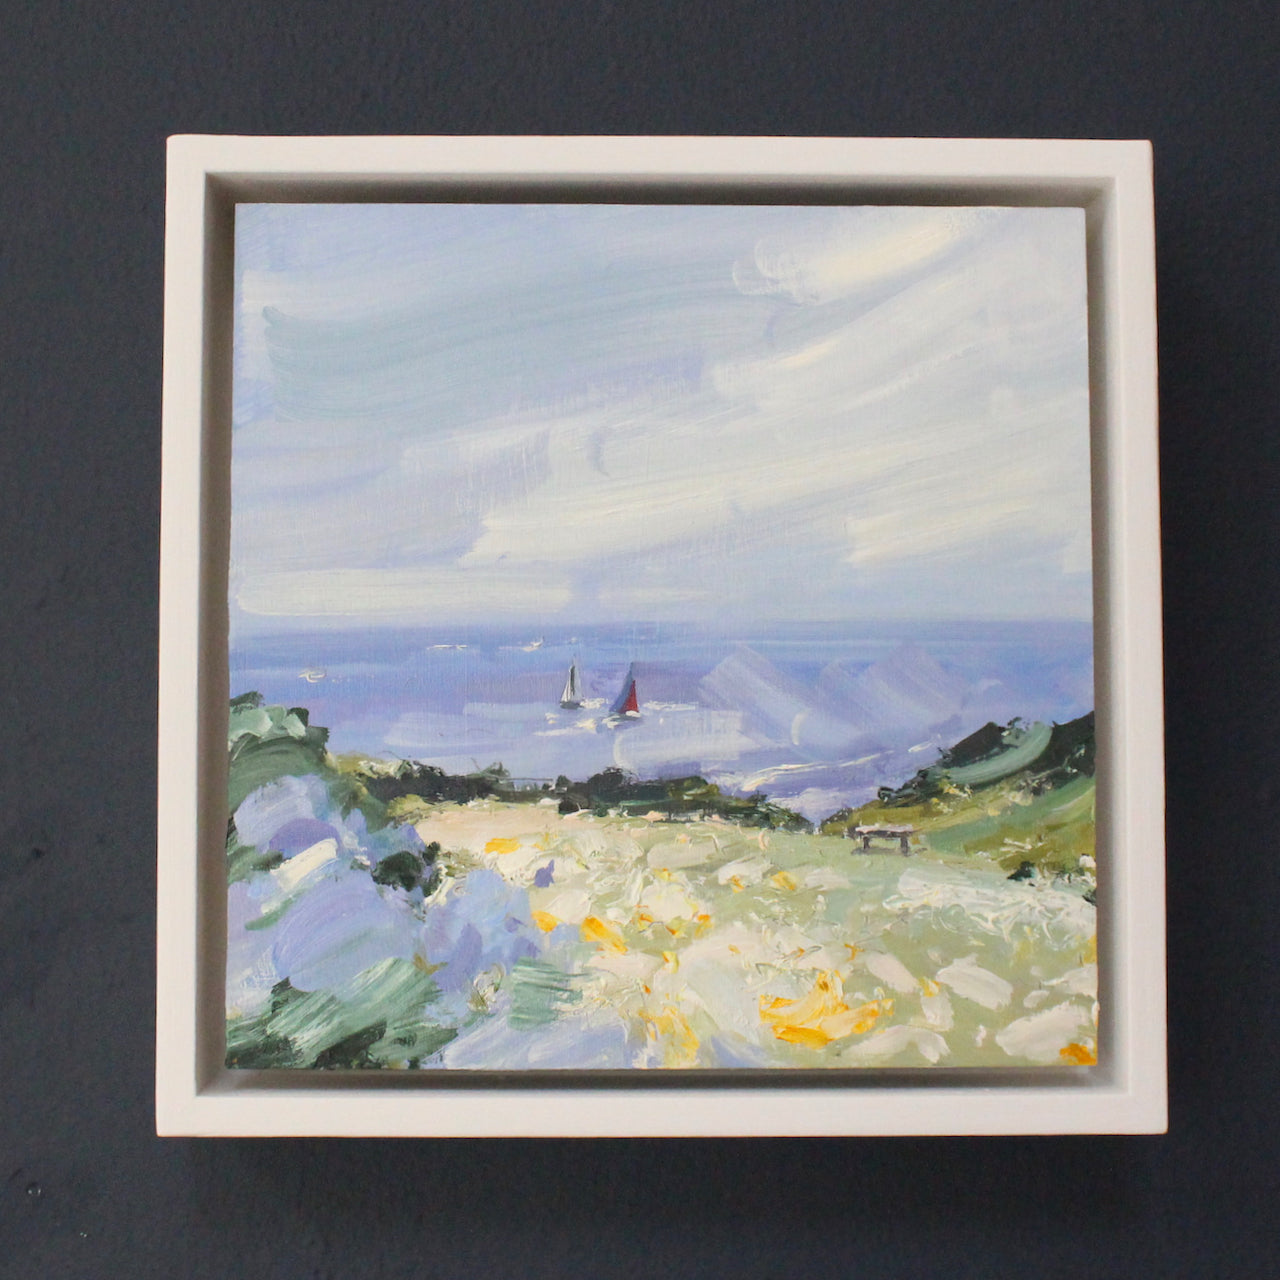 a framed Seascape by artist Jill Hudson of boats sailing in the background and coastal landscape in foreground